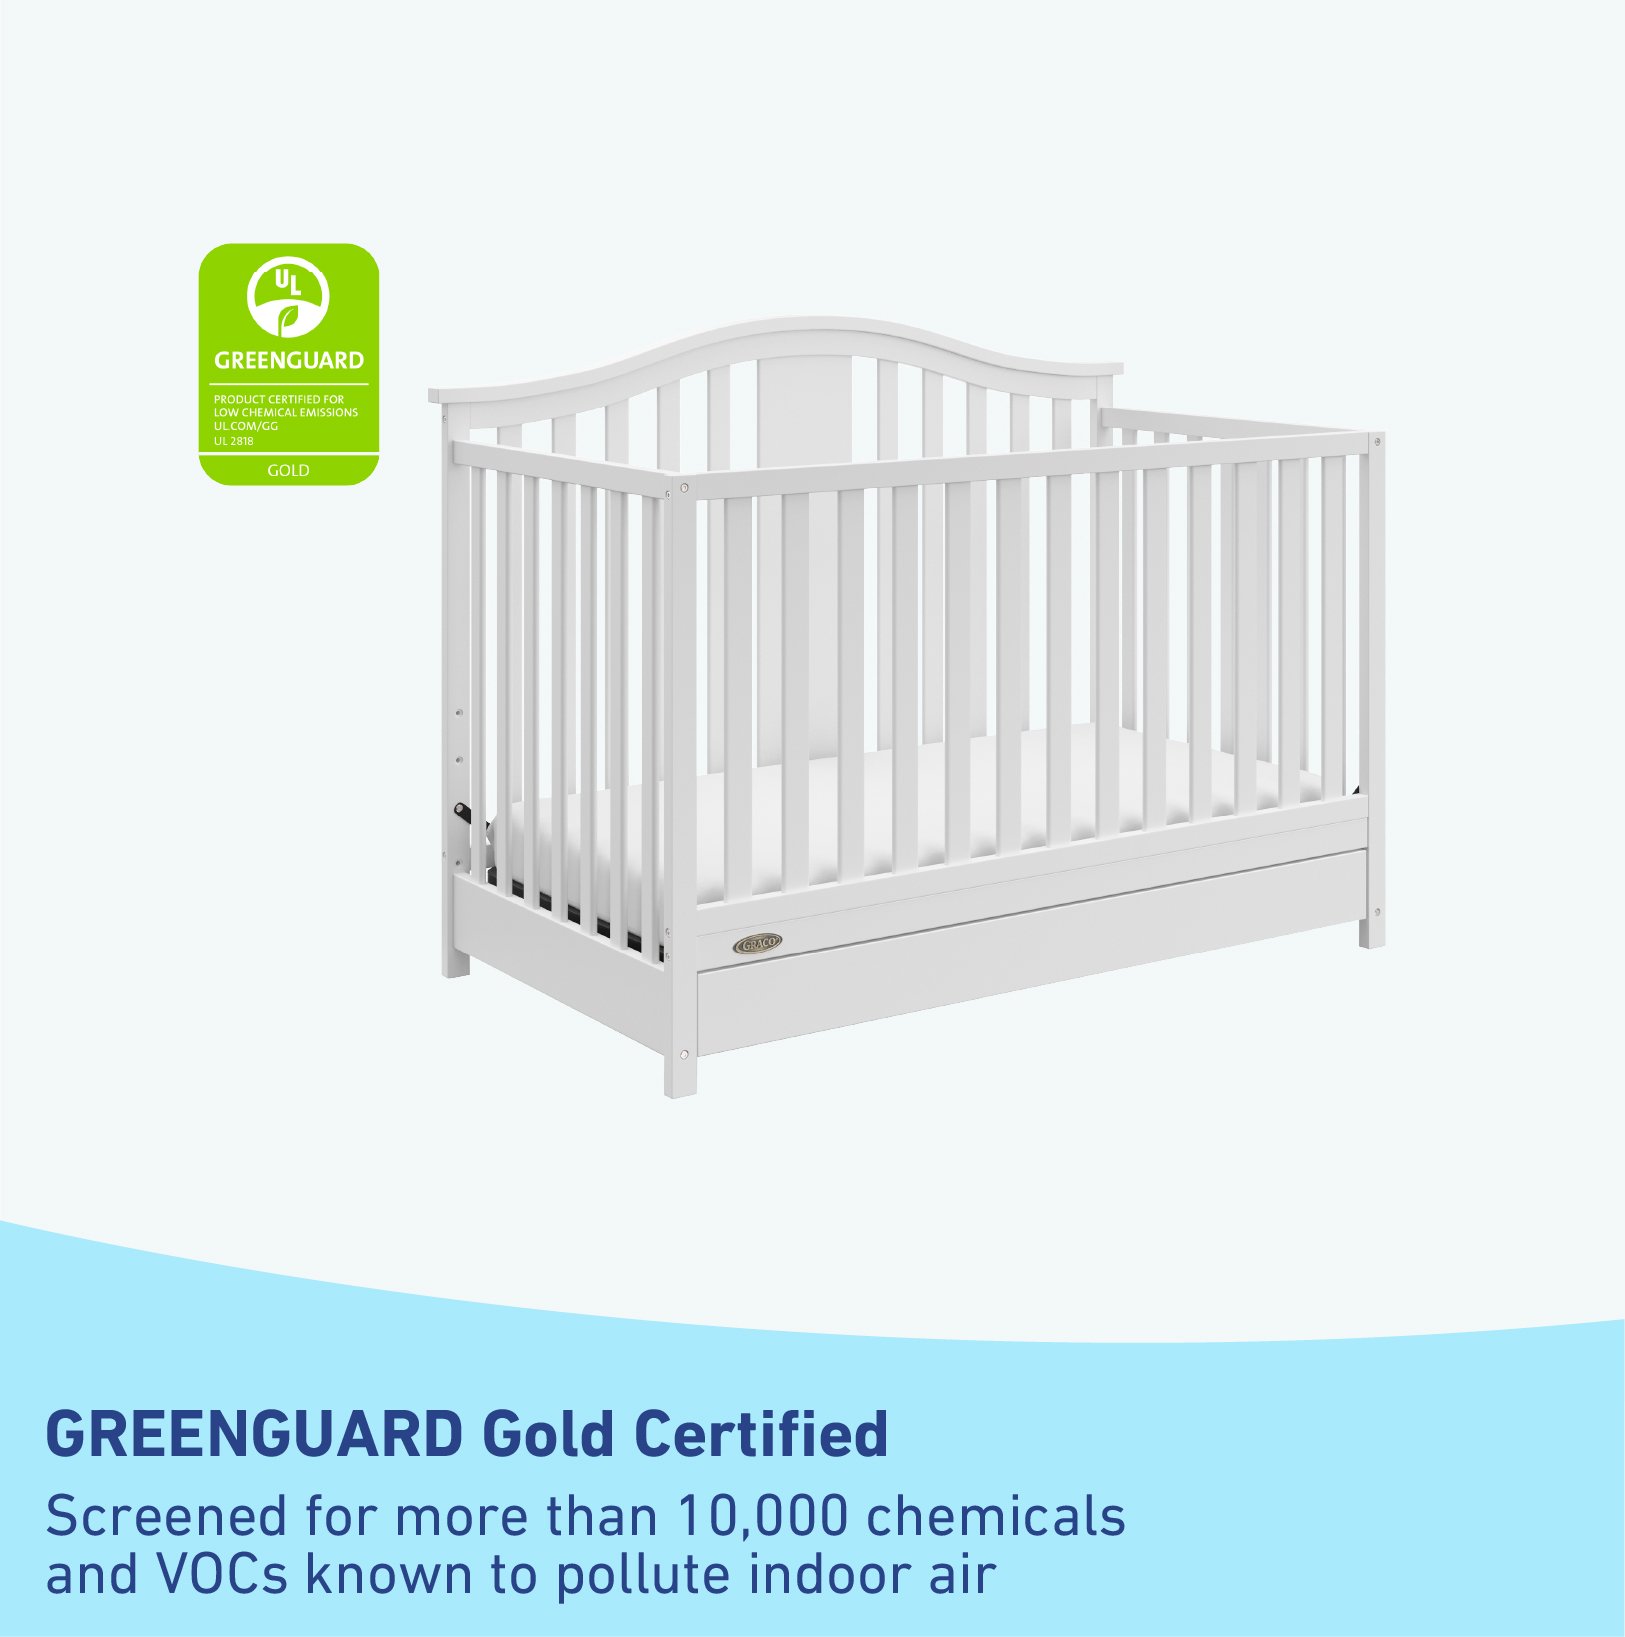 Espresso Assembly Required Graco Solano 4-in-1 Convertible Crib with Drawer Three Position Adjustable Height Mattress Mattress Not Included Easily Converts to Toddler Bed Day Bed or Full Bed 